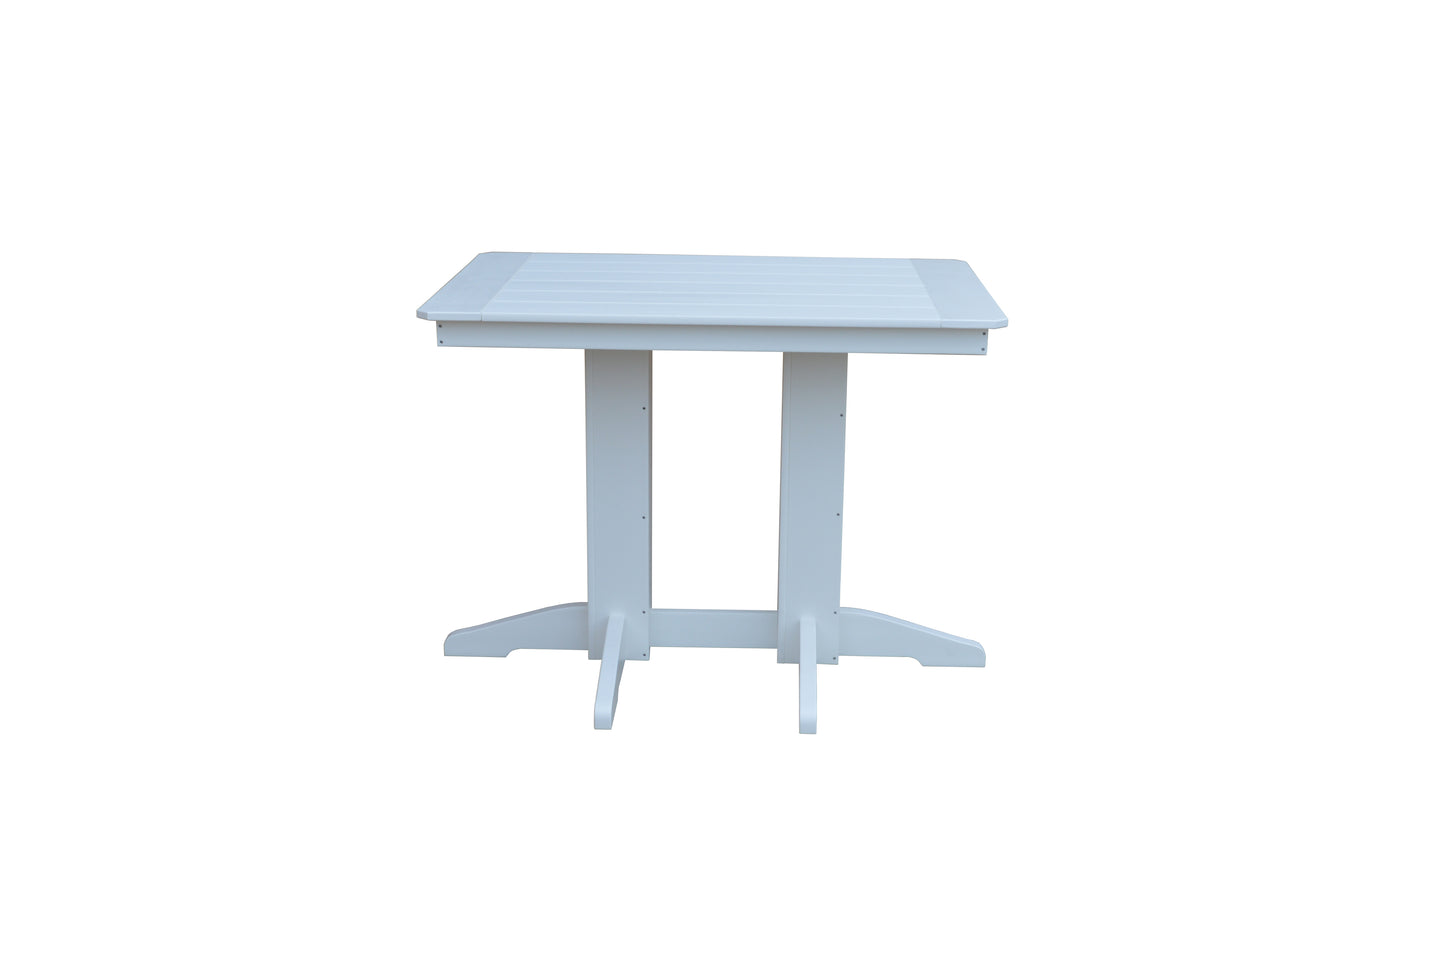 A&L Furniture Co. Recycled Plastic 4' Table (COUNTER HEIGHT) - LEAD TIME TO SHIP 10 BUSINESS DAYS